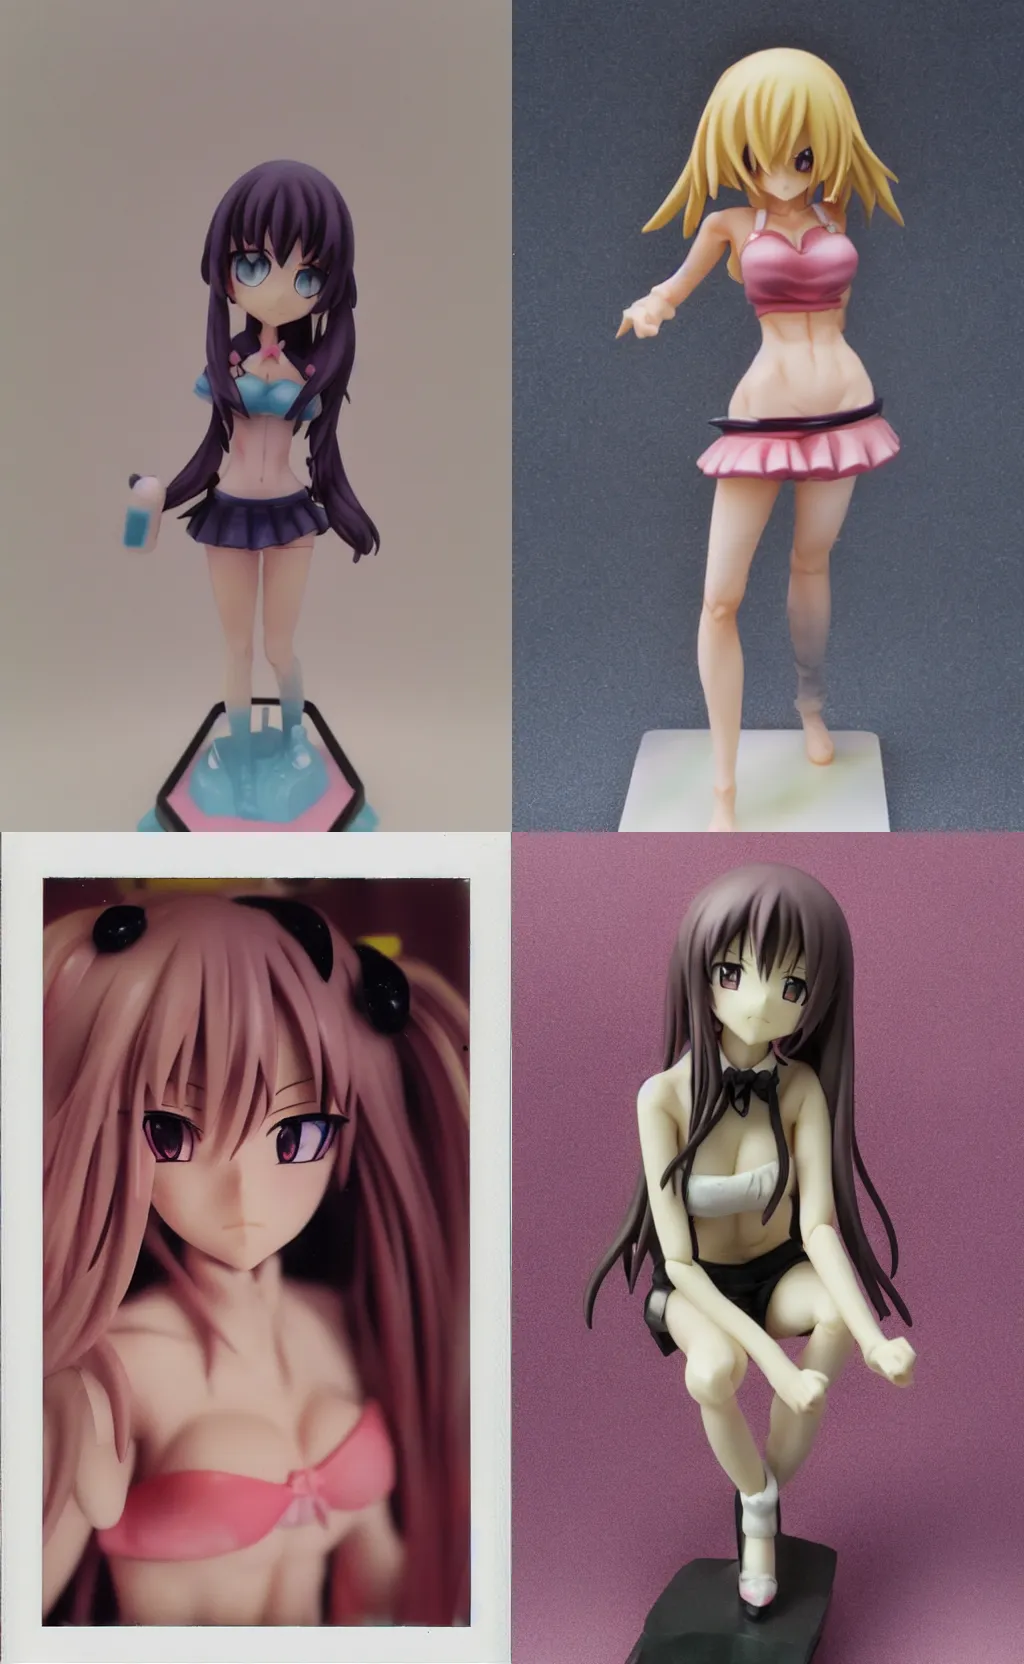 Prompt: Polaroid photo of an anime girl, anime girl figurine made of wax sculpture